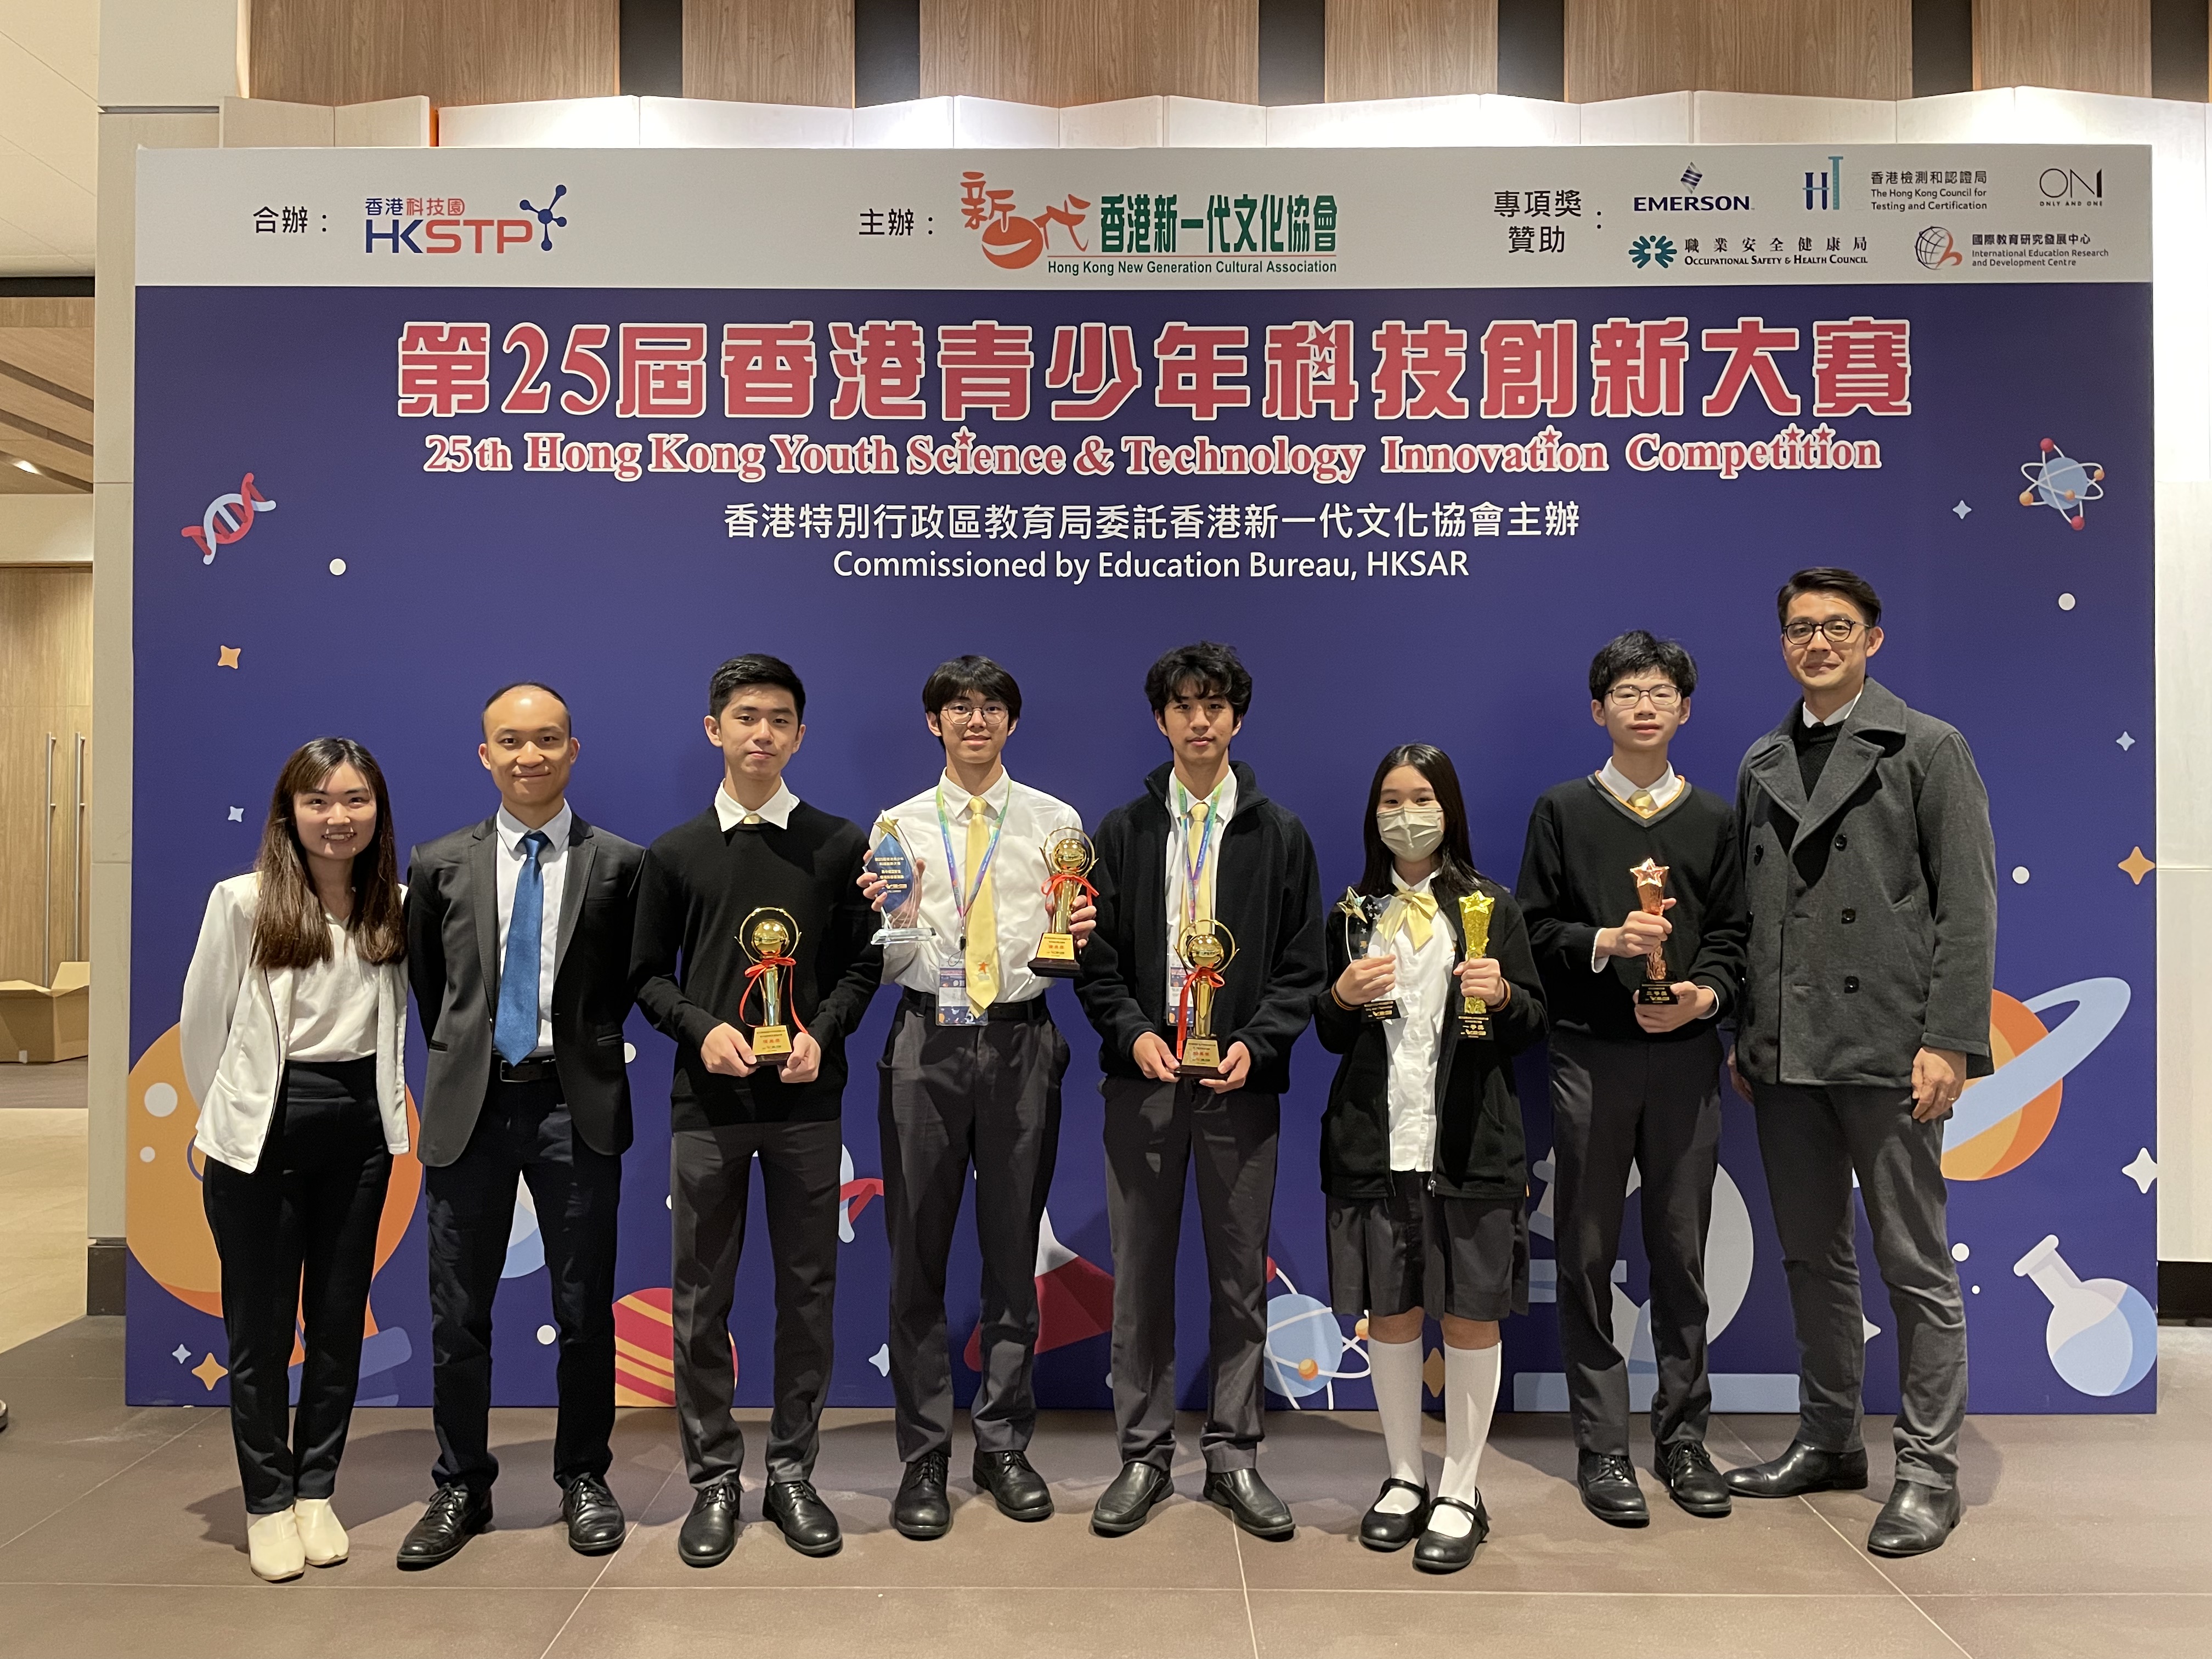 Hong Kong Youth Science & Technology Innovation Competition (HKYSTIC)